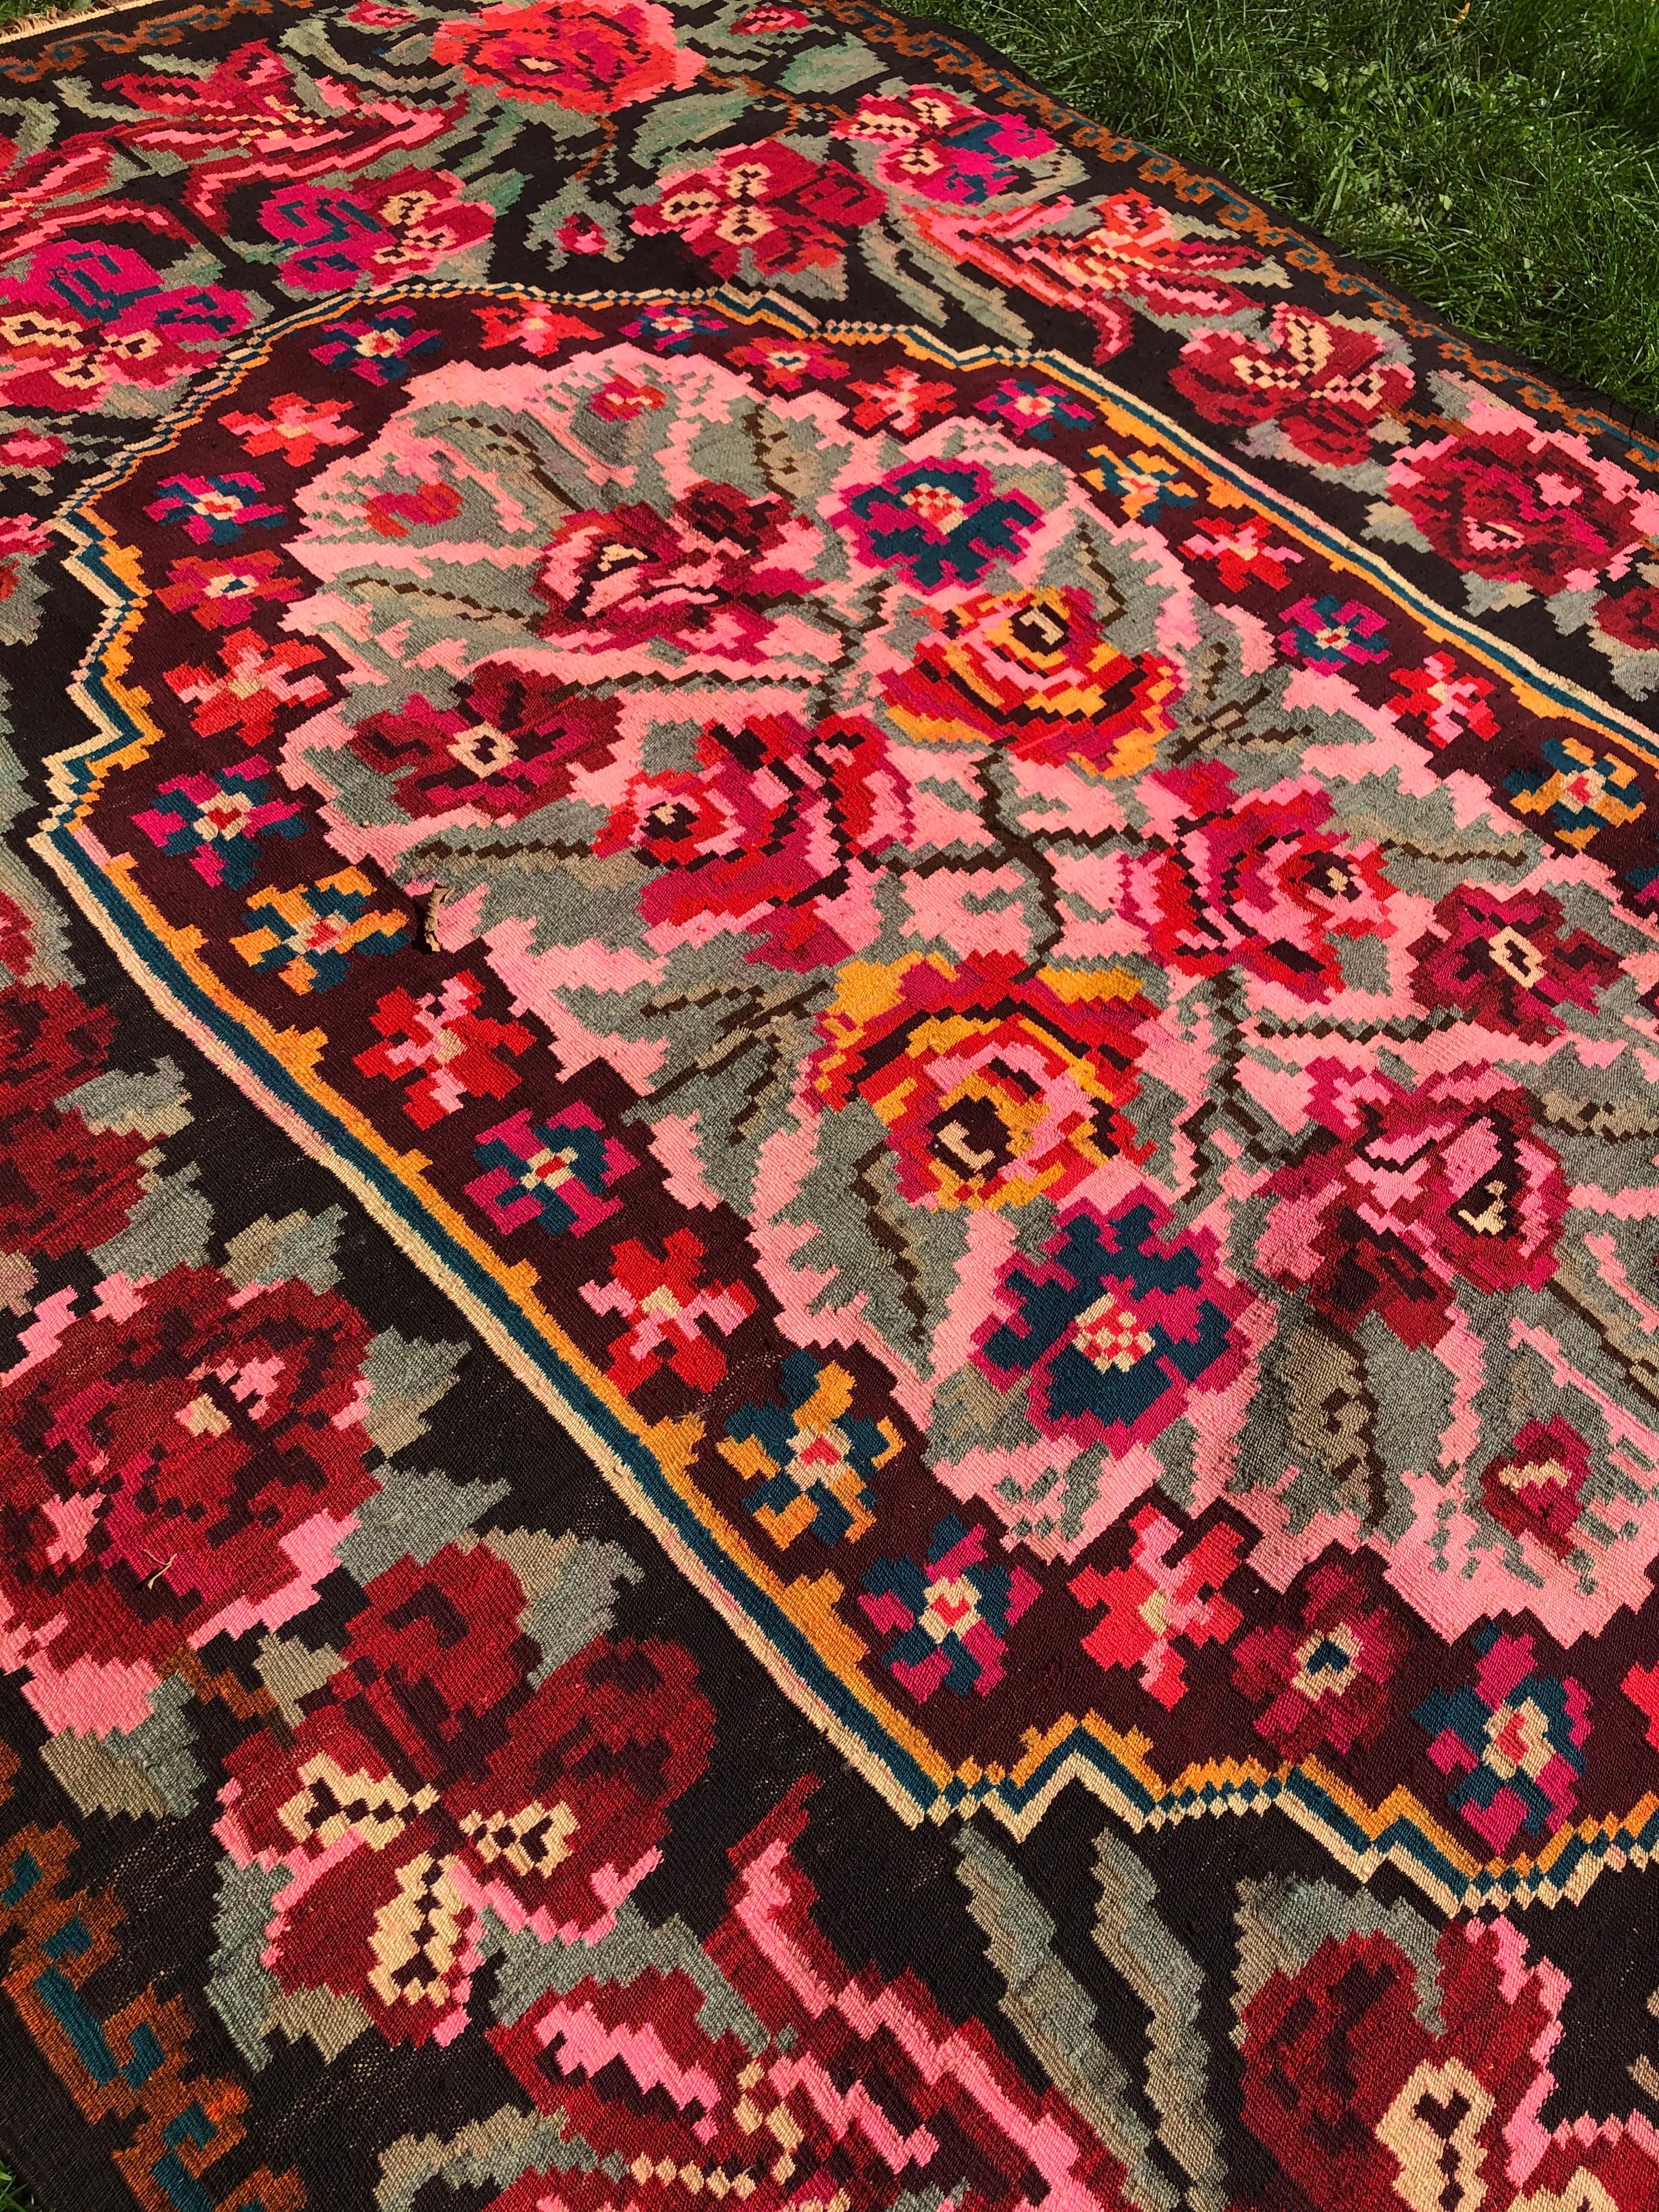 Woven Colorful Room Sized Floral Kilim Carpet For Sale